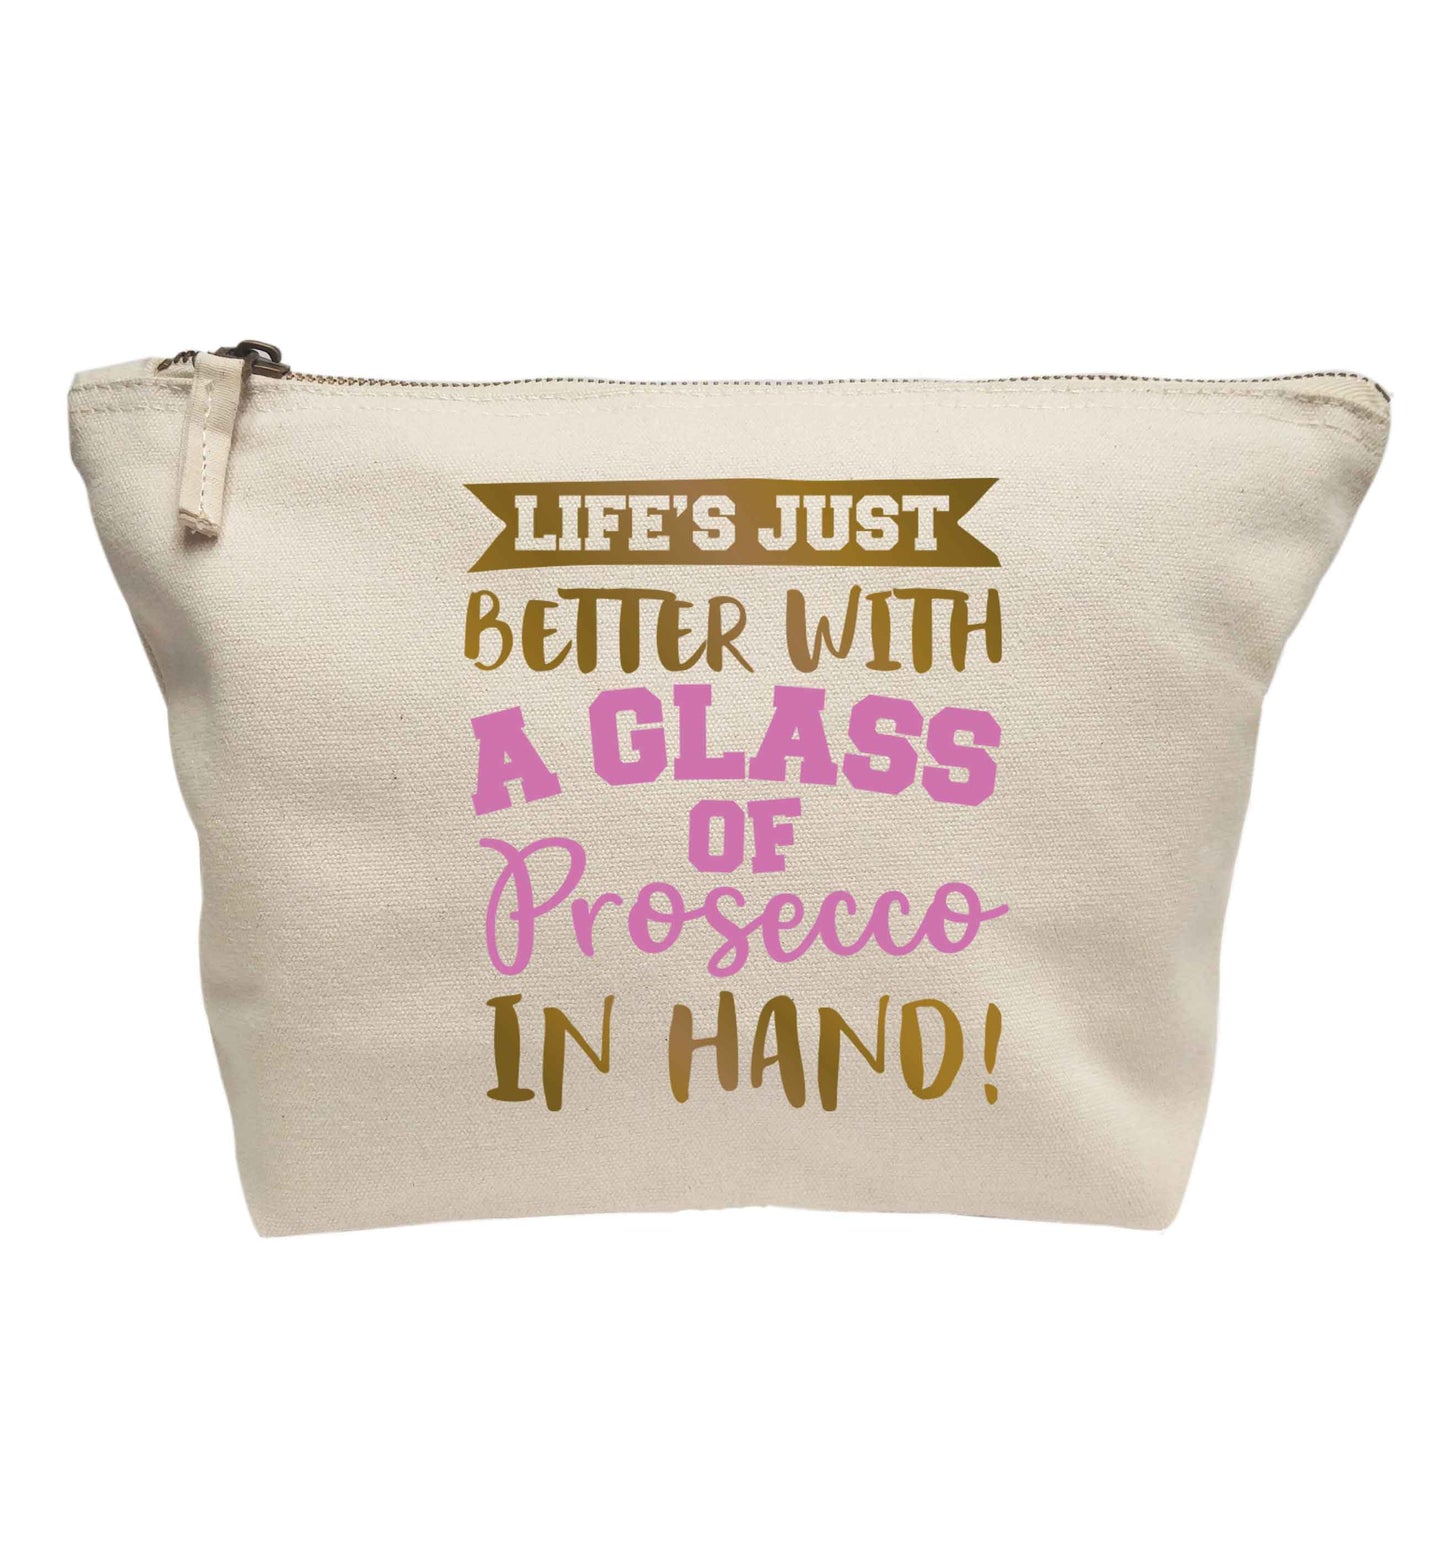 Life's just better with a glass of prosecco in hand | makeup / wash bag